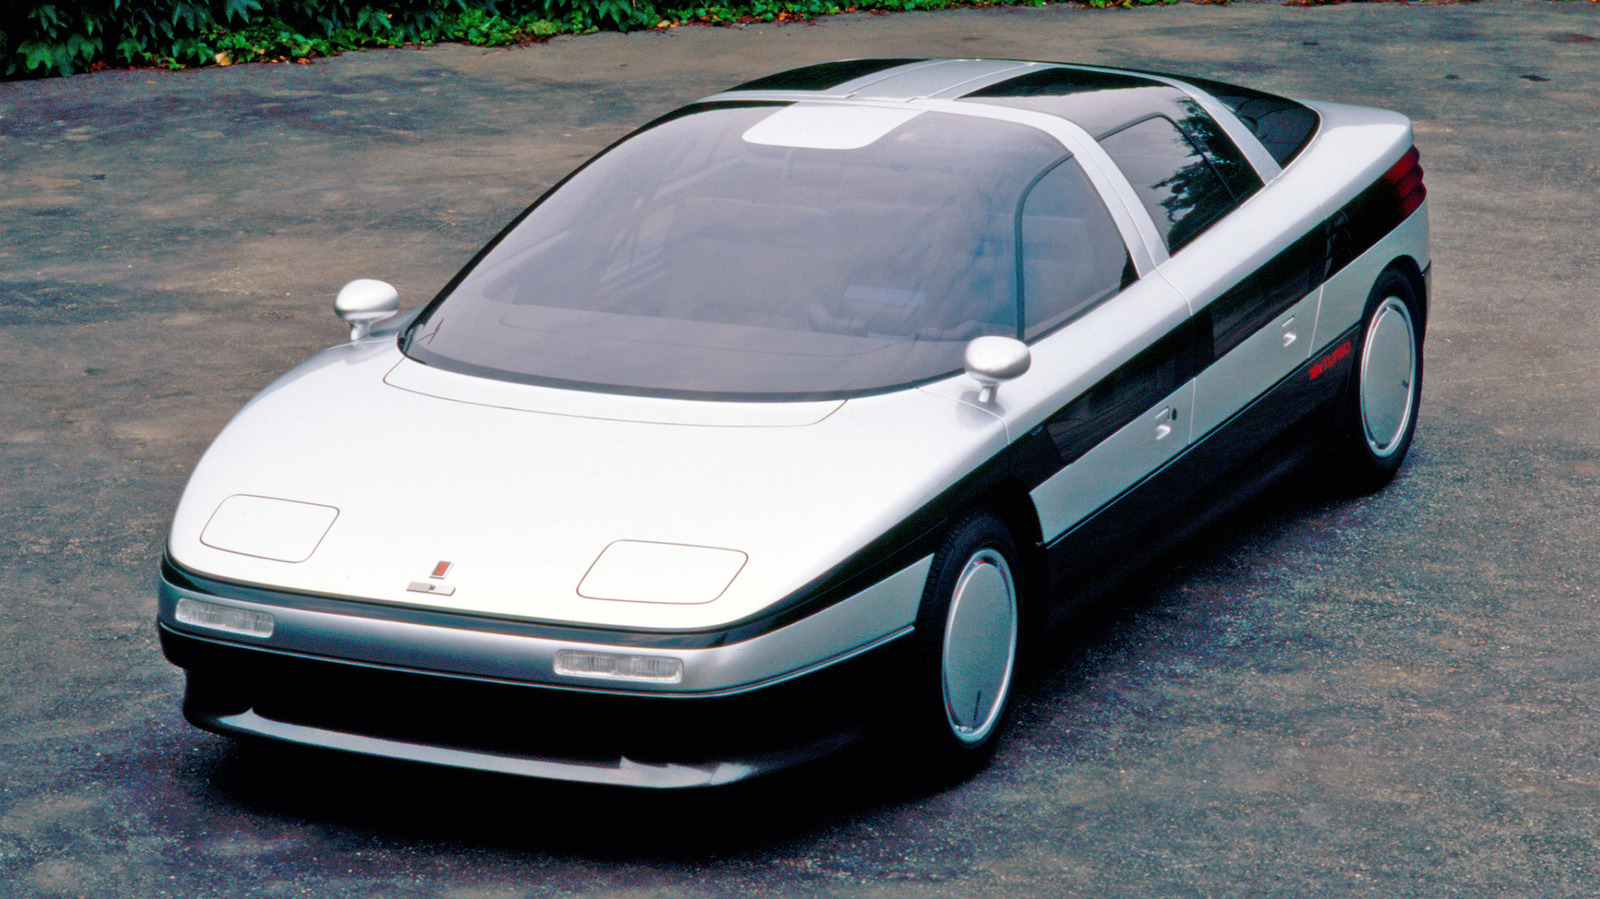 This 1986 Oldsmobile Concept Car Has One Of The Coolest Steering Wheels We’ve Ever Seen – SlashGear